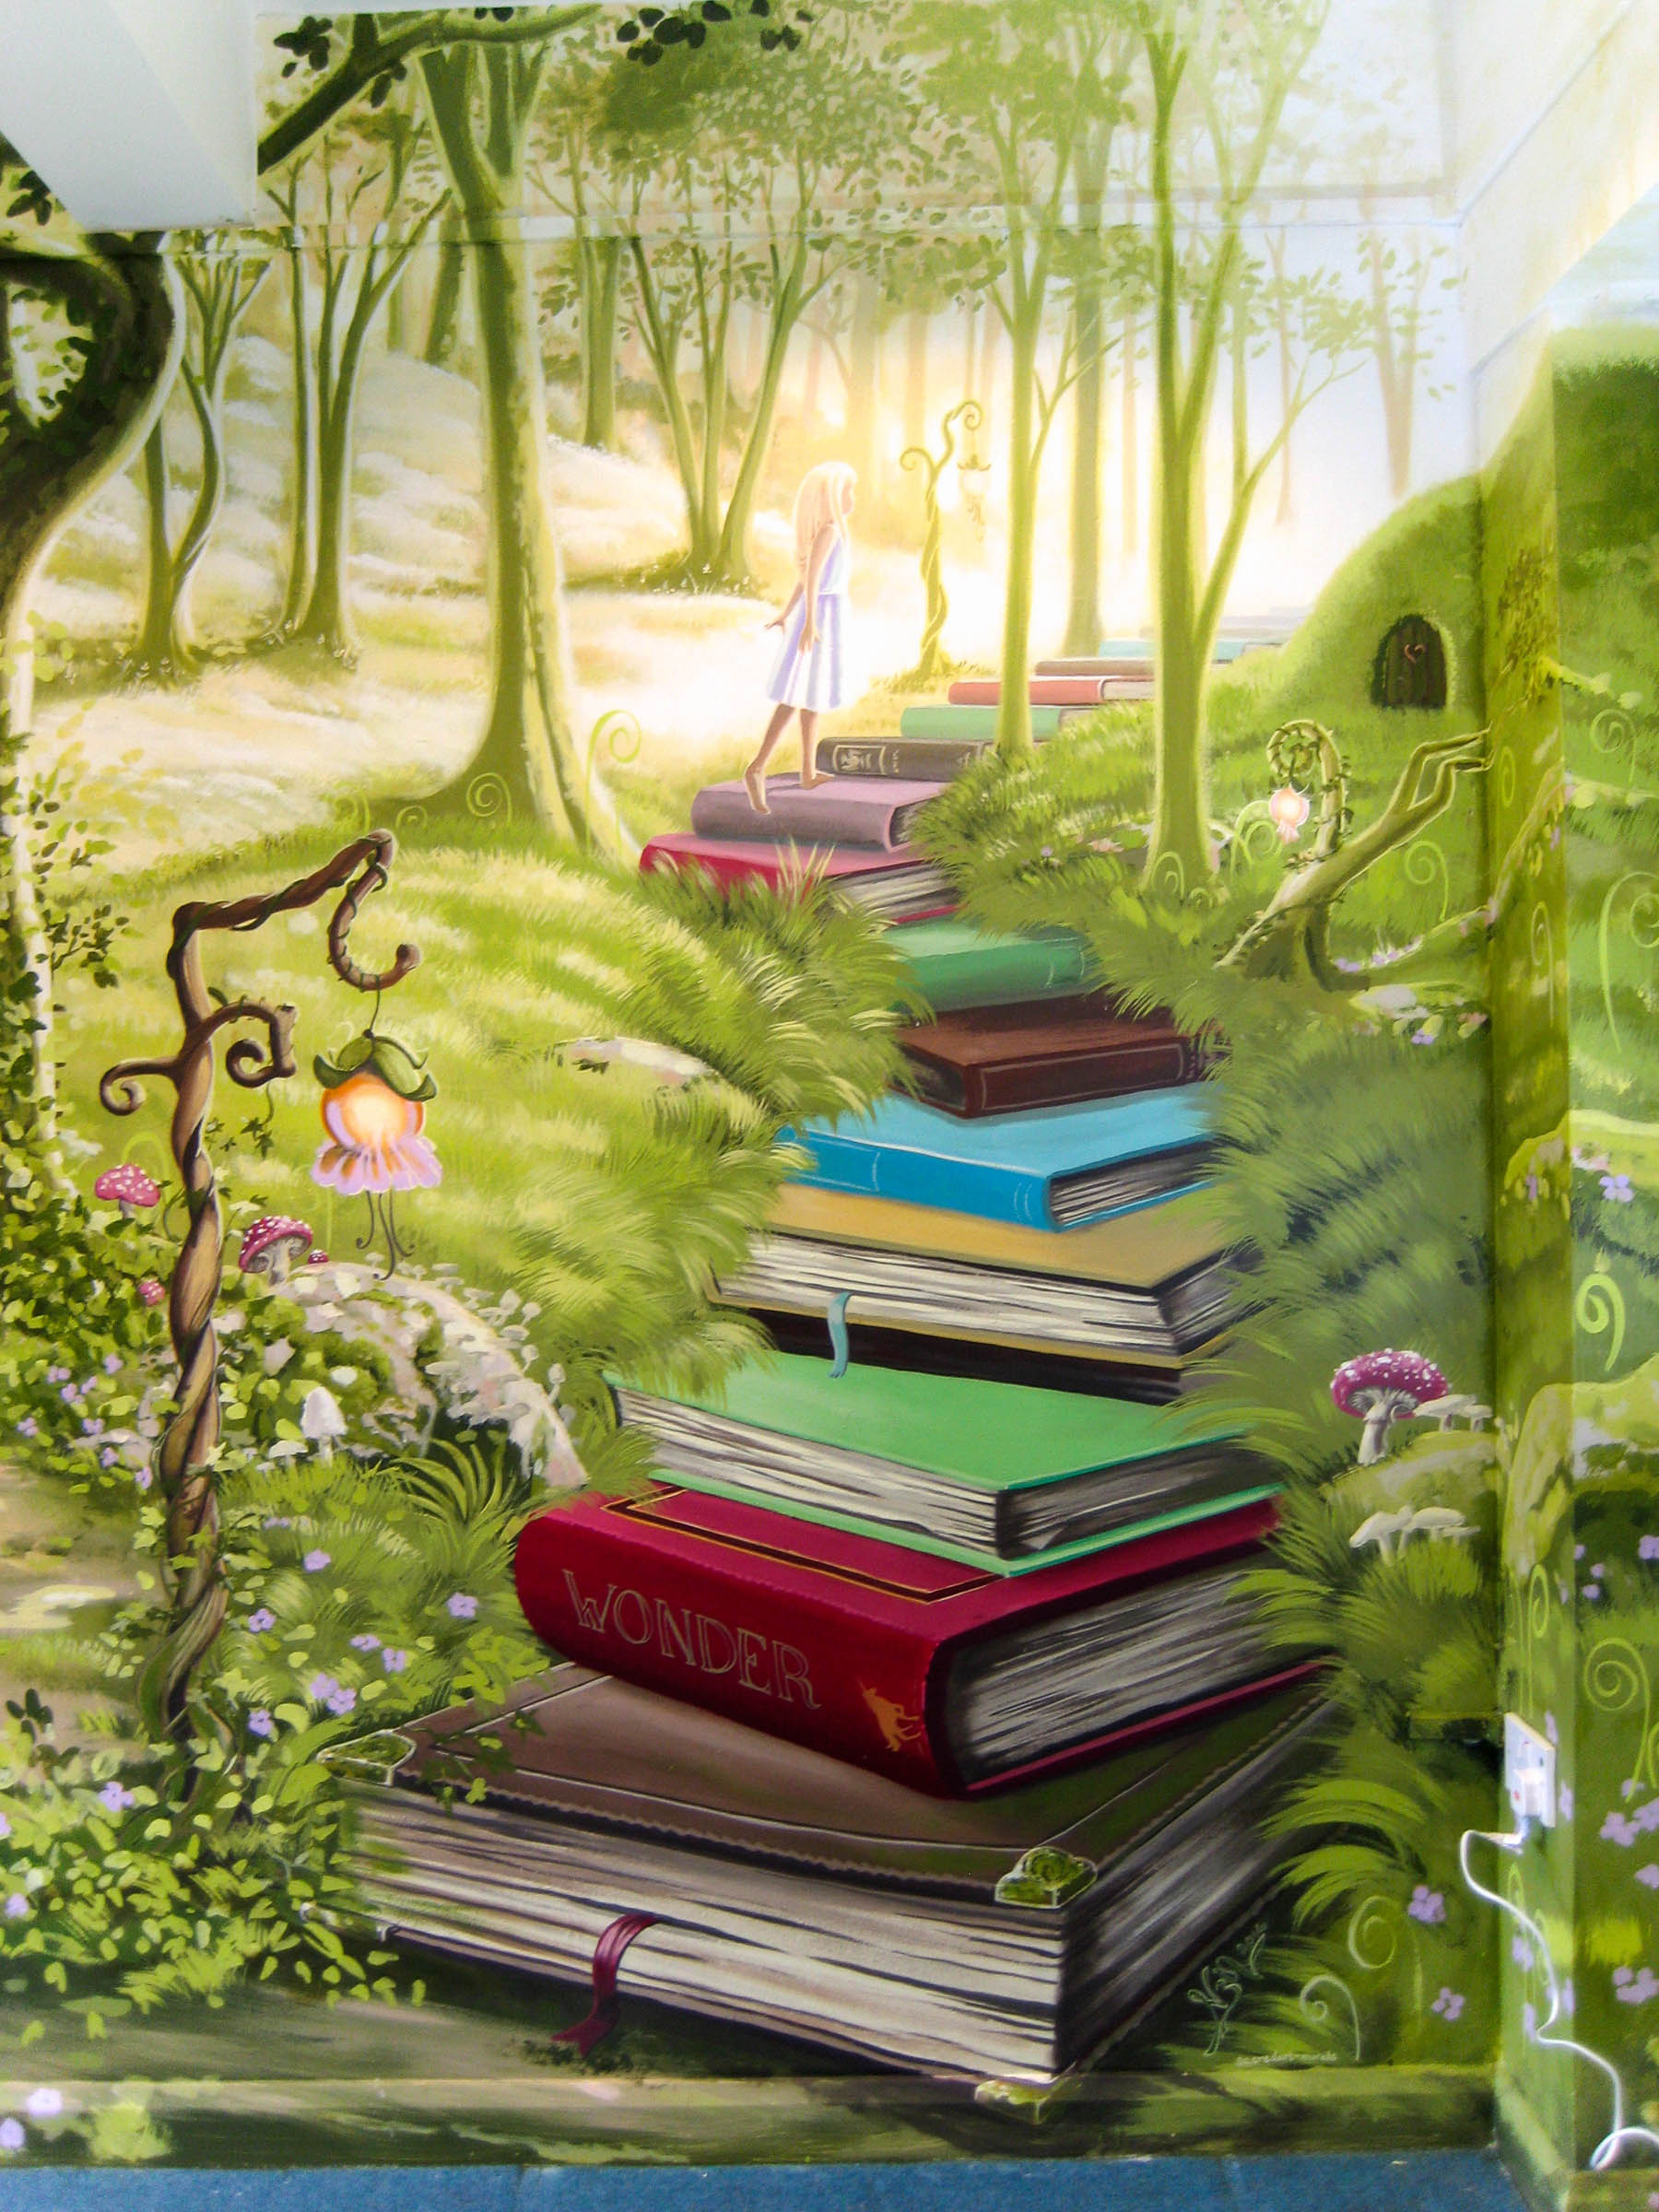 School library mural with inspired youngster on a book staircase stairs in a fantastical woodland scene